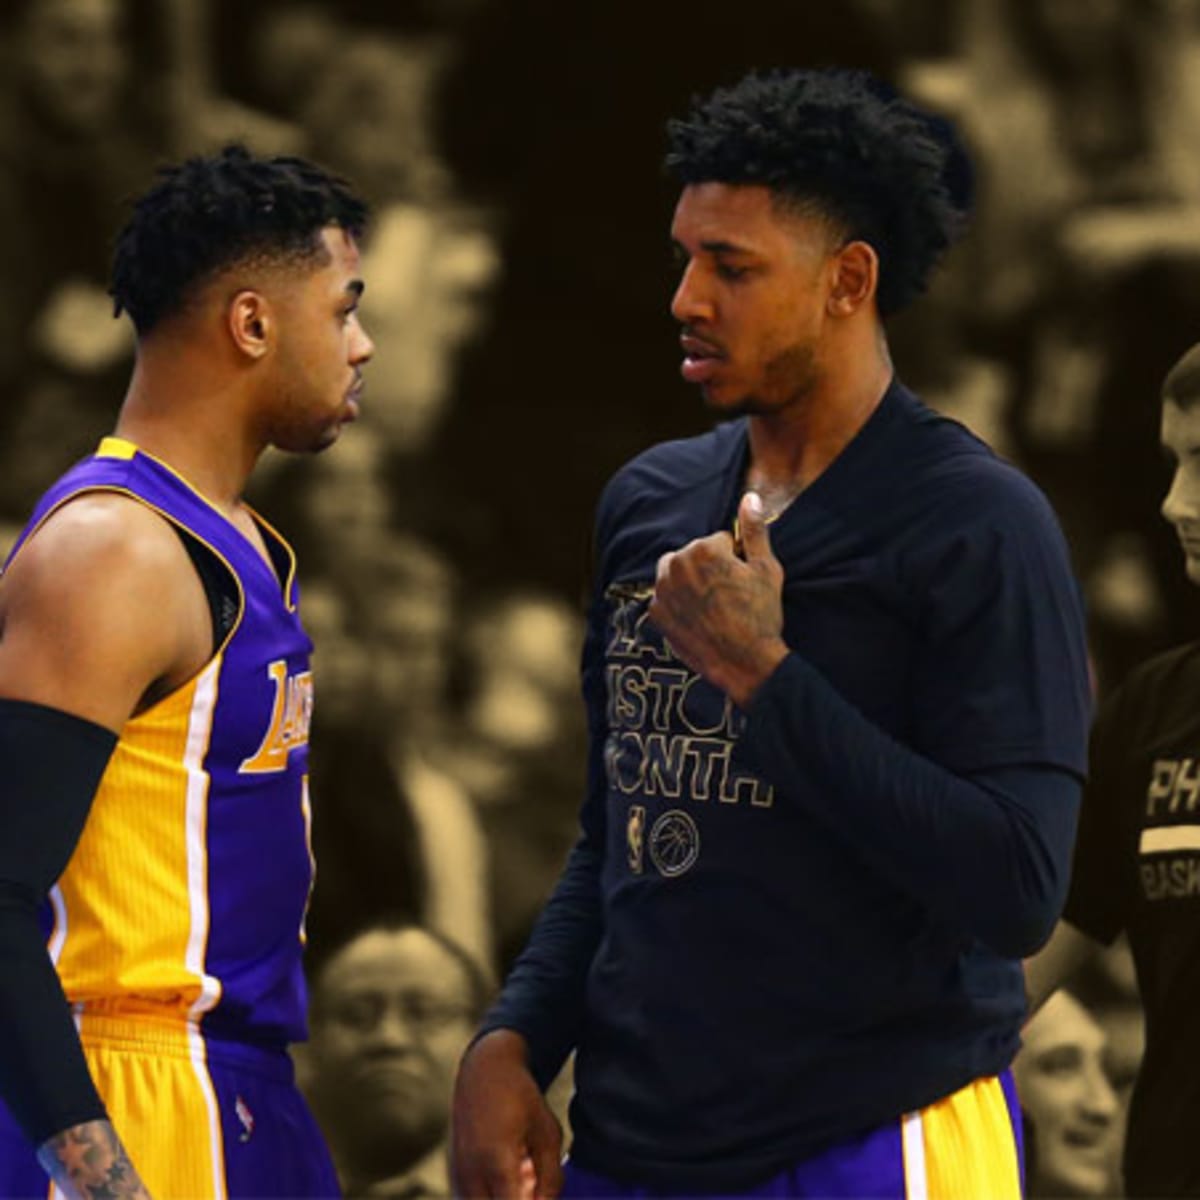 Lakers' D'Angelo Russell, Nick Young unlikely to play vs. Knicks